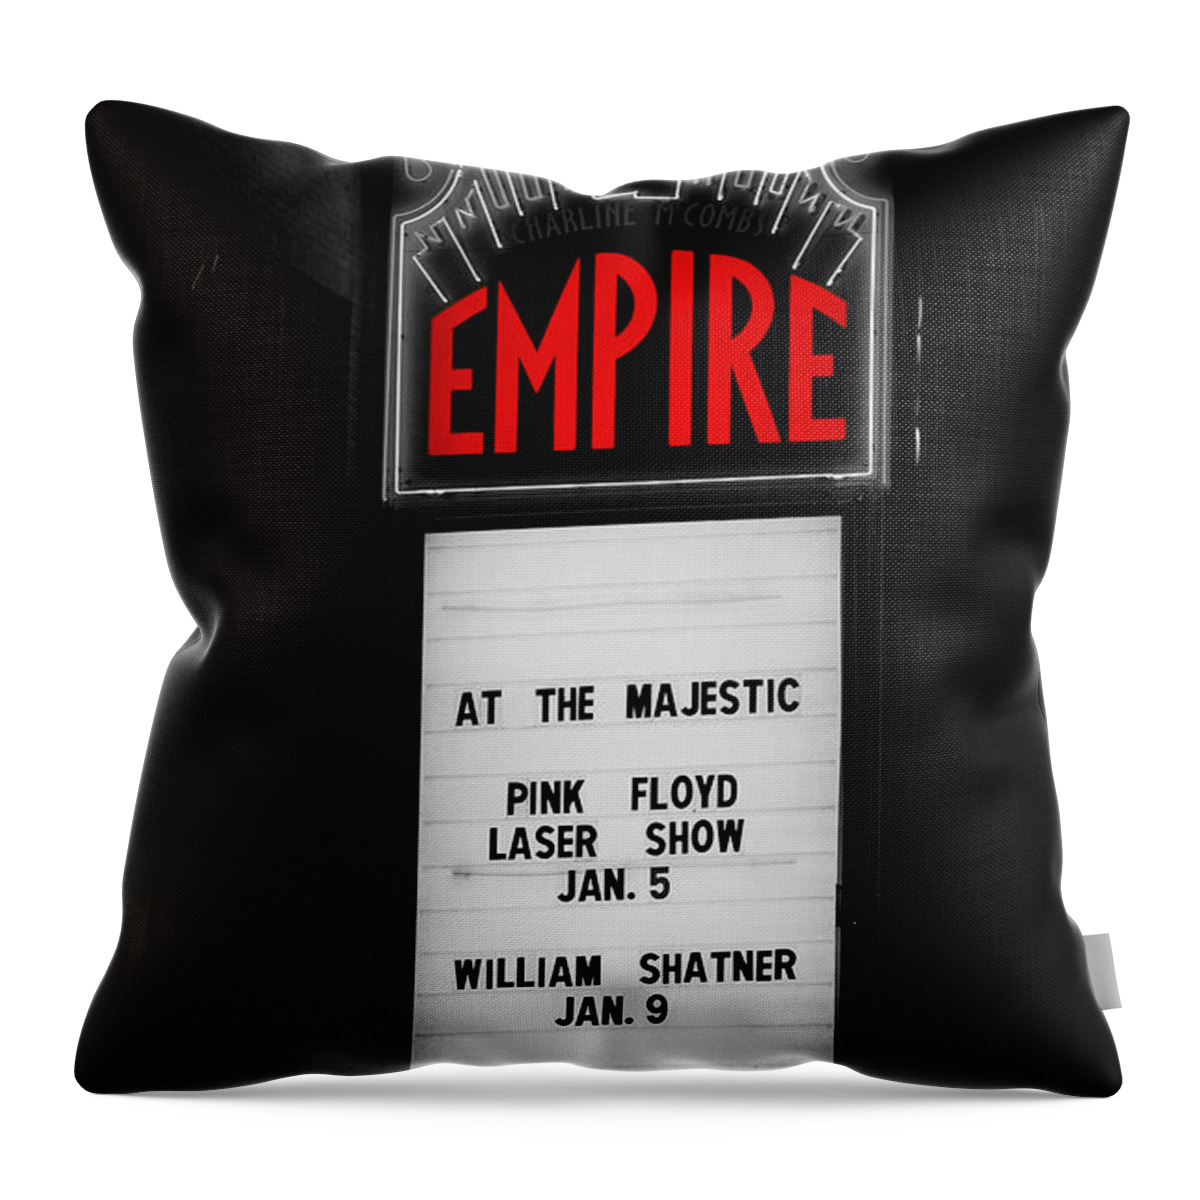 Empire Throw Pillow featuring the photograph Classic Empire Theater Illuminated Marquee Sign with Pink Floyd and William Shatner Color Splash by Shawn O'Brien